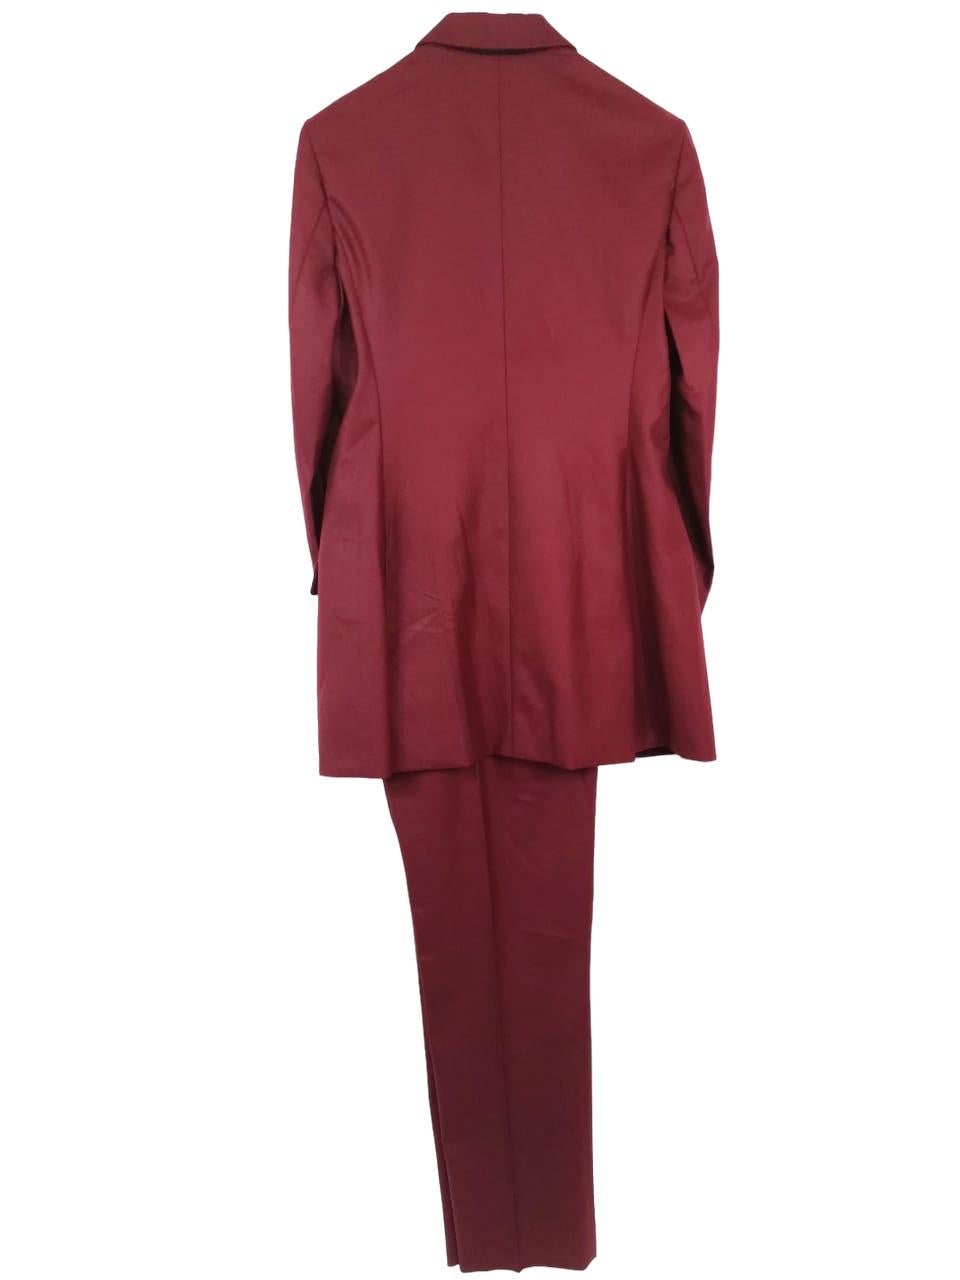 Women's Christian Dior Jacket & Trousers Suit For Sale